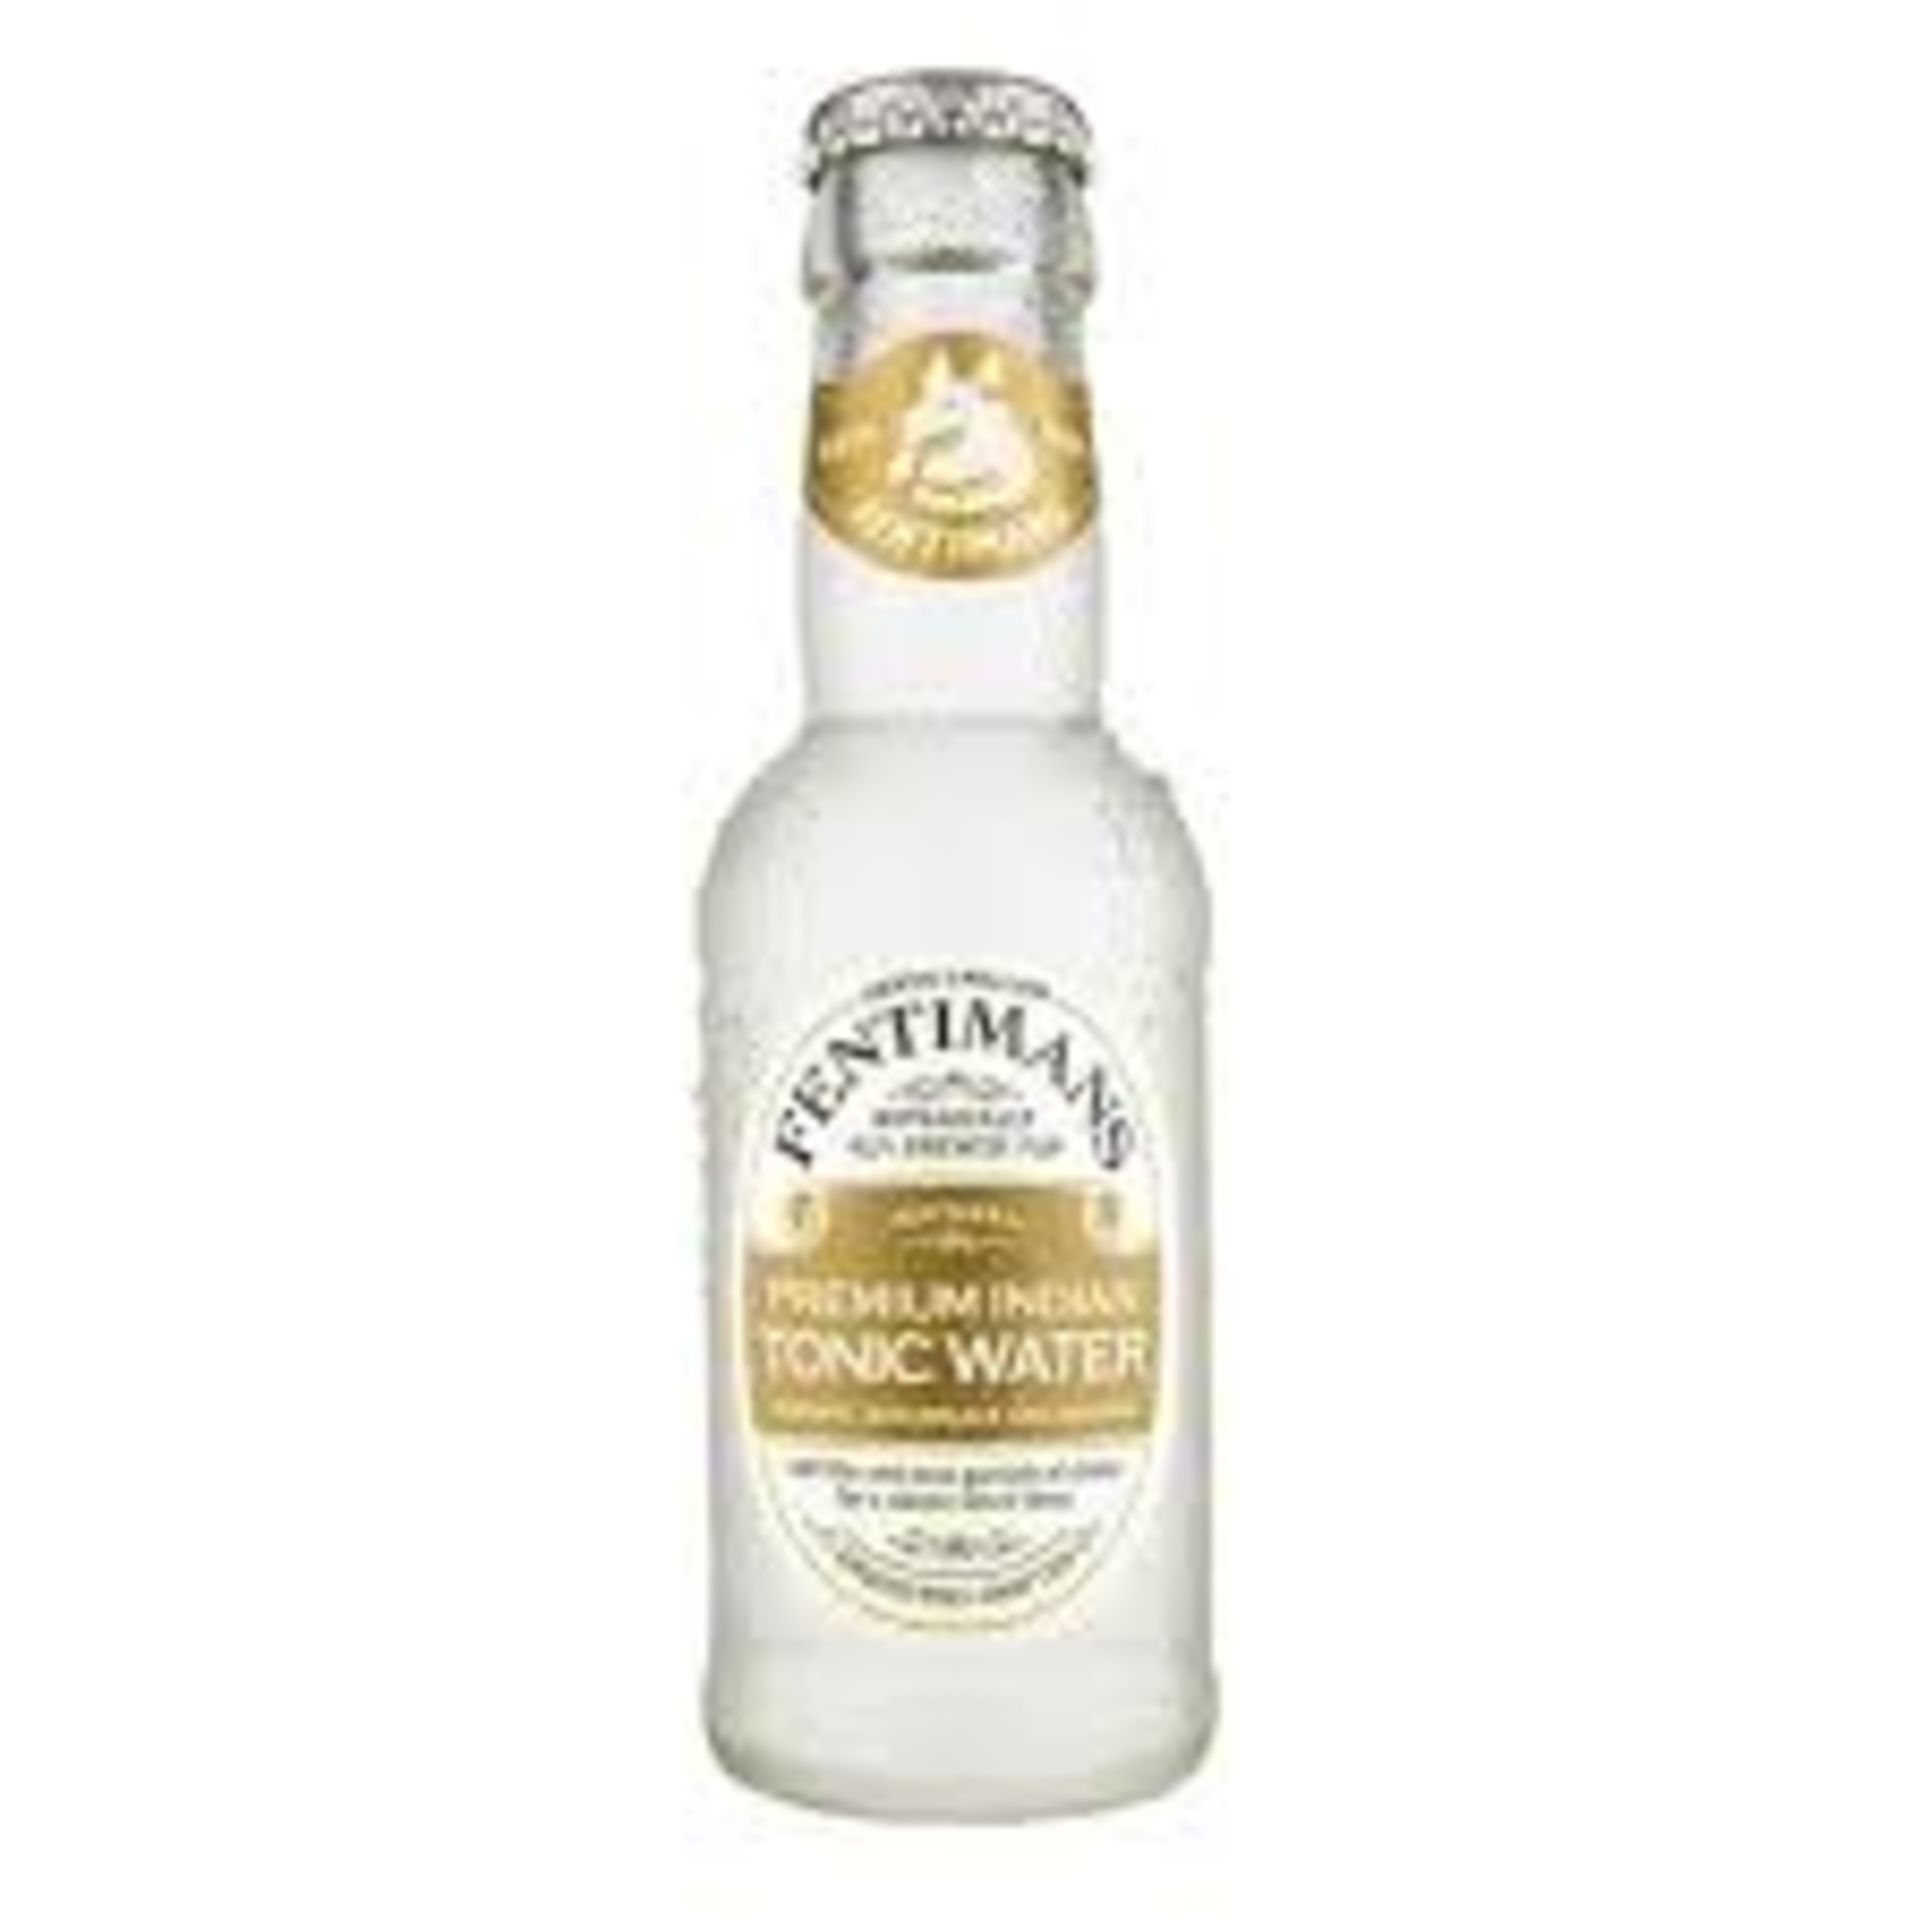 RRP £772 Approx. Count 54) (A11)spW48n4450e Fentimans Premium Indian Tonic Water, 8 x 500ml - Image 3 of 3